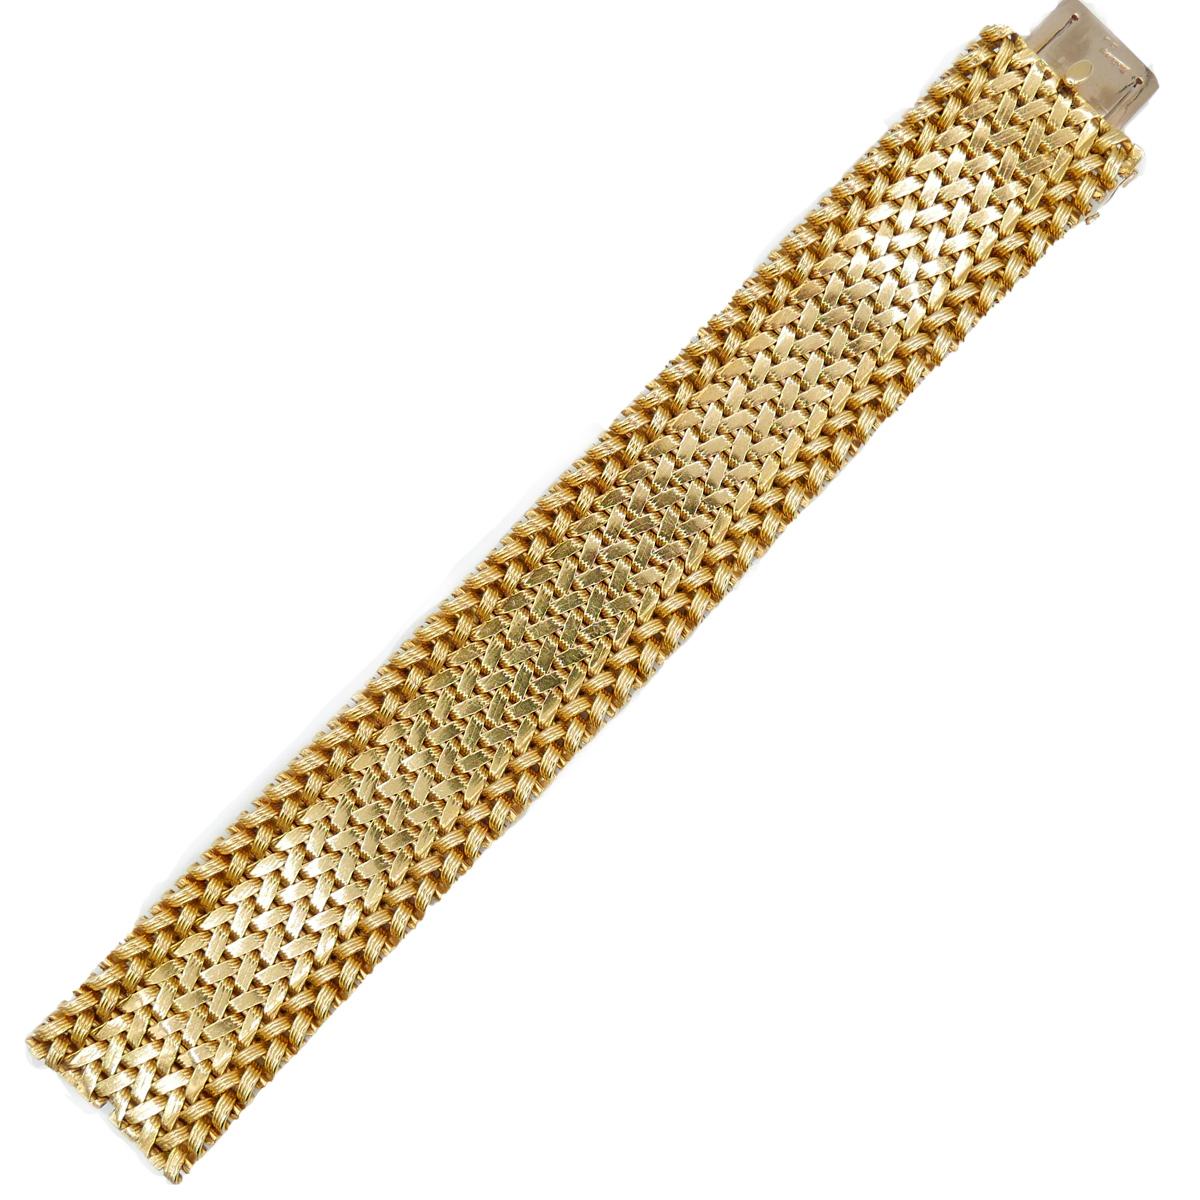 This 18k yellow gold bracelet was made in 1964 under the Kutchinsky jewelry house in London and displays an intricate woven basket-weave design to the gold. It is beautifully made.
Secured with a box clasp and safety catch.
Signed